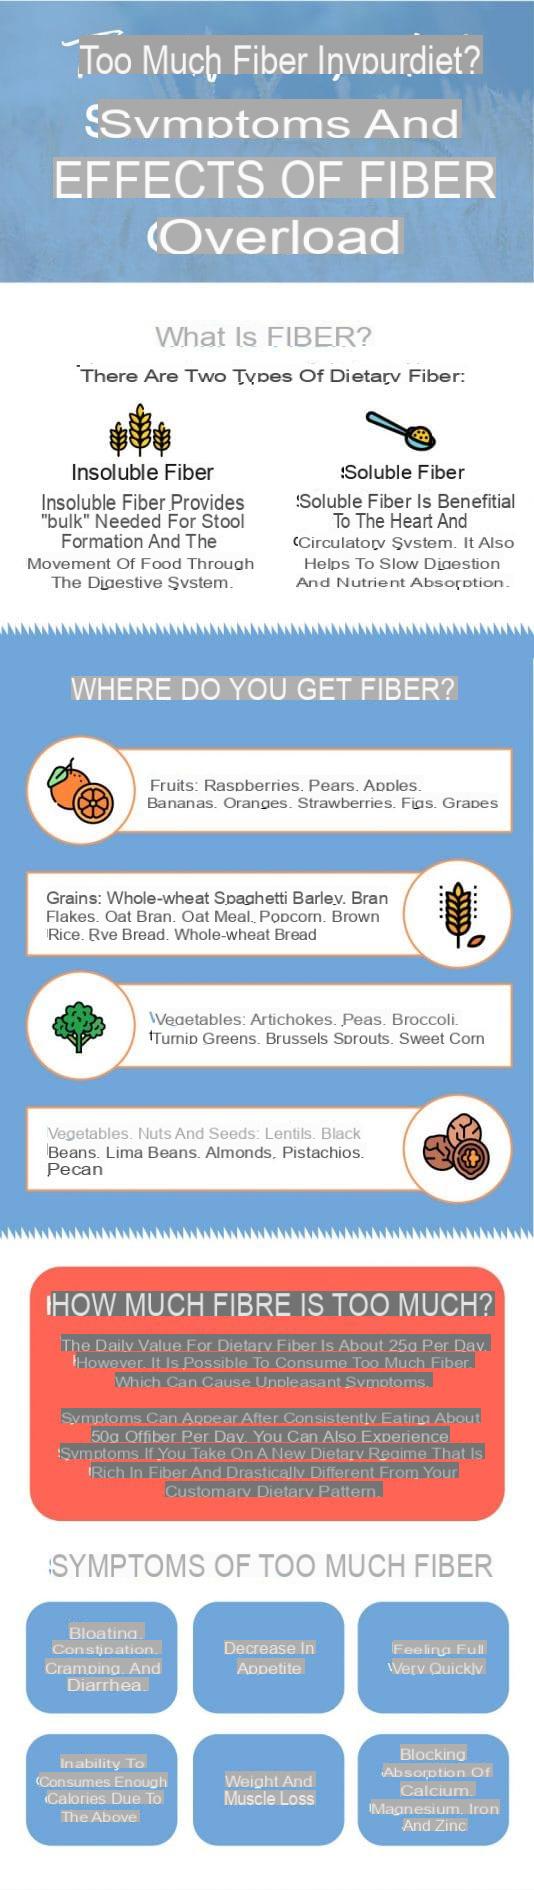 Find out if you are overdoing the fiber